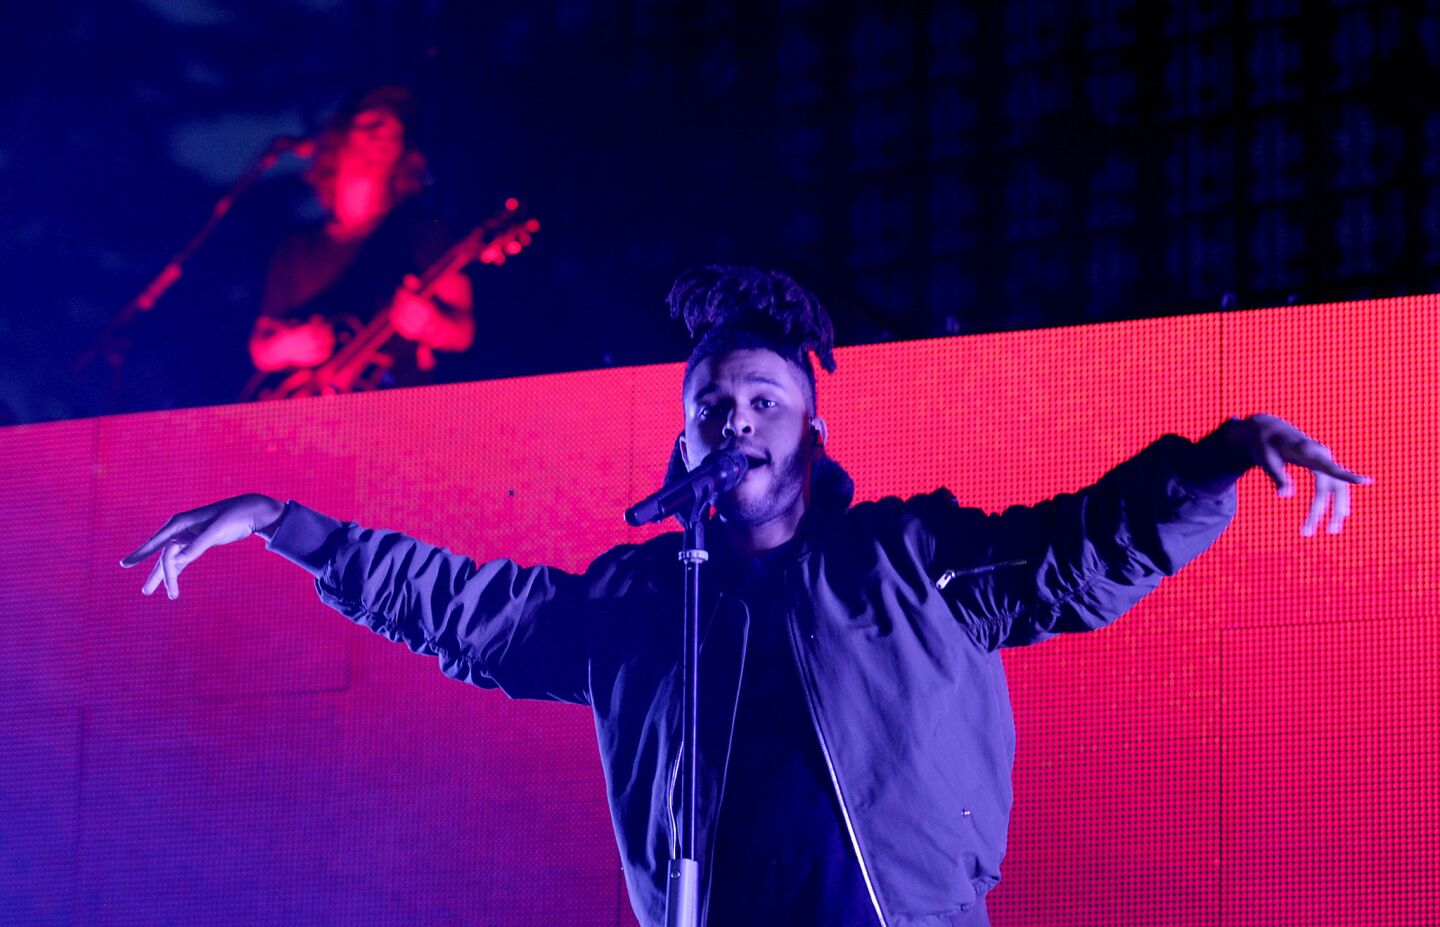 The Weeknd performs during Hard Summer at the Fairplex in Pomona on Aug. 1, 2015. Read the review.